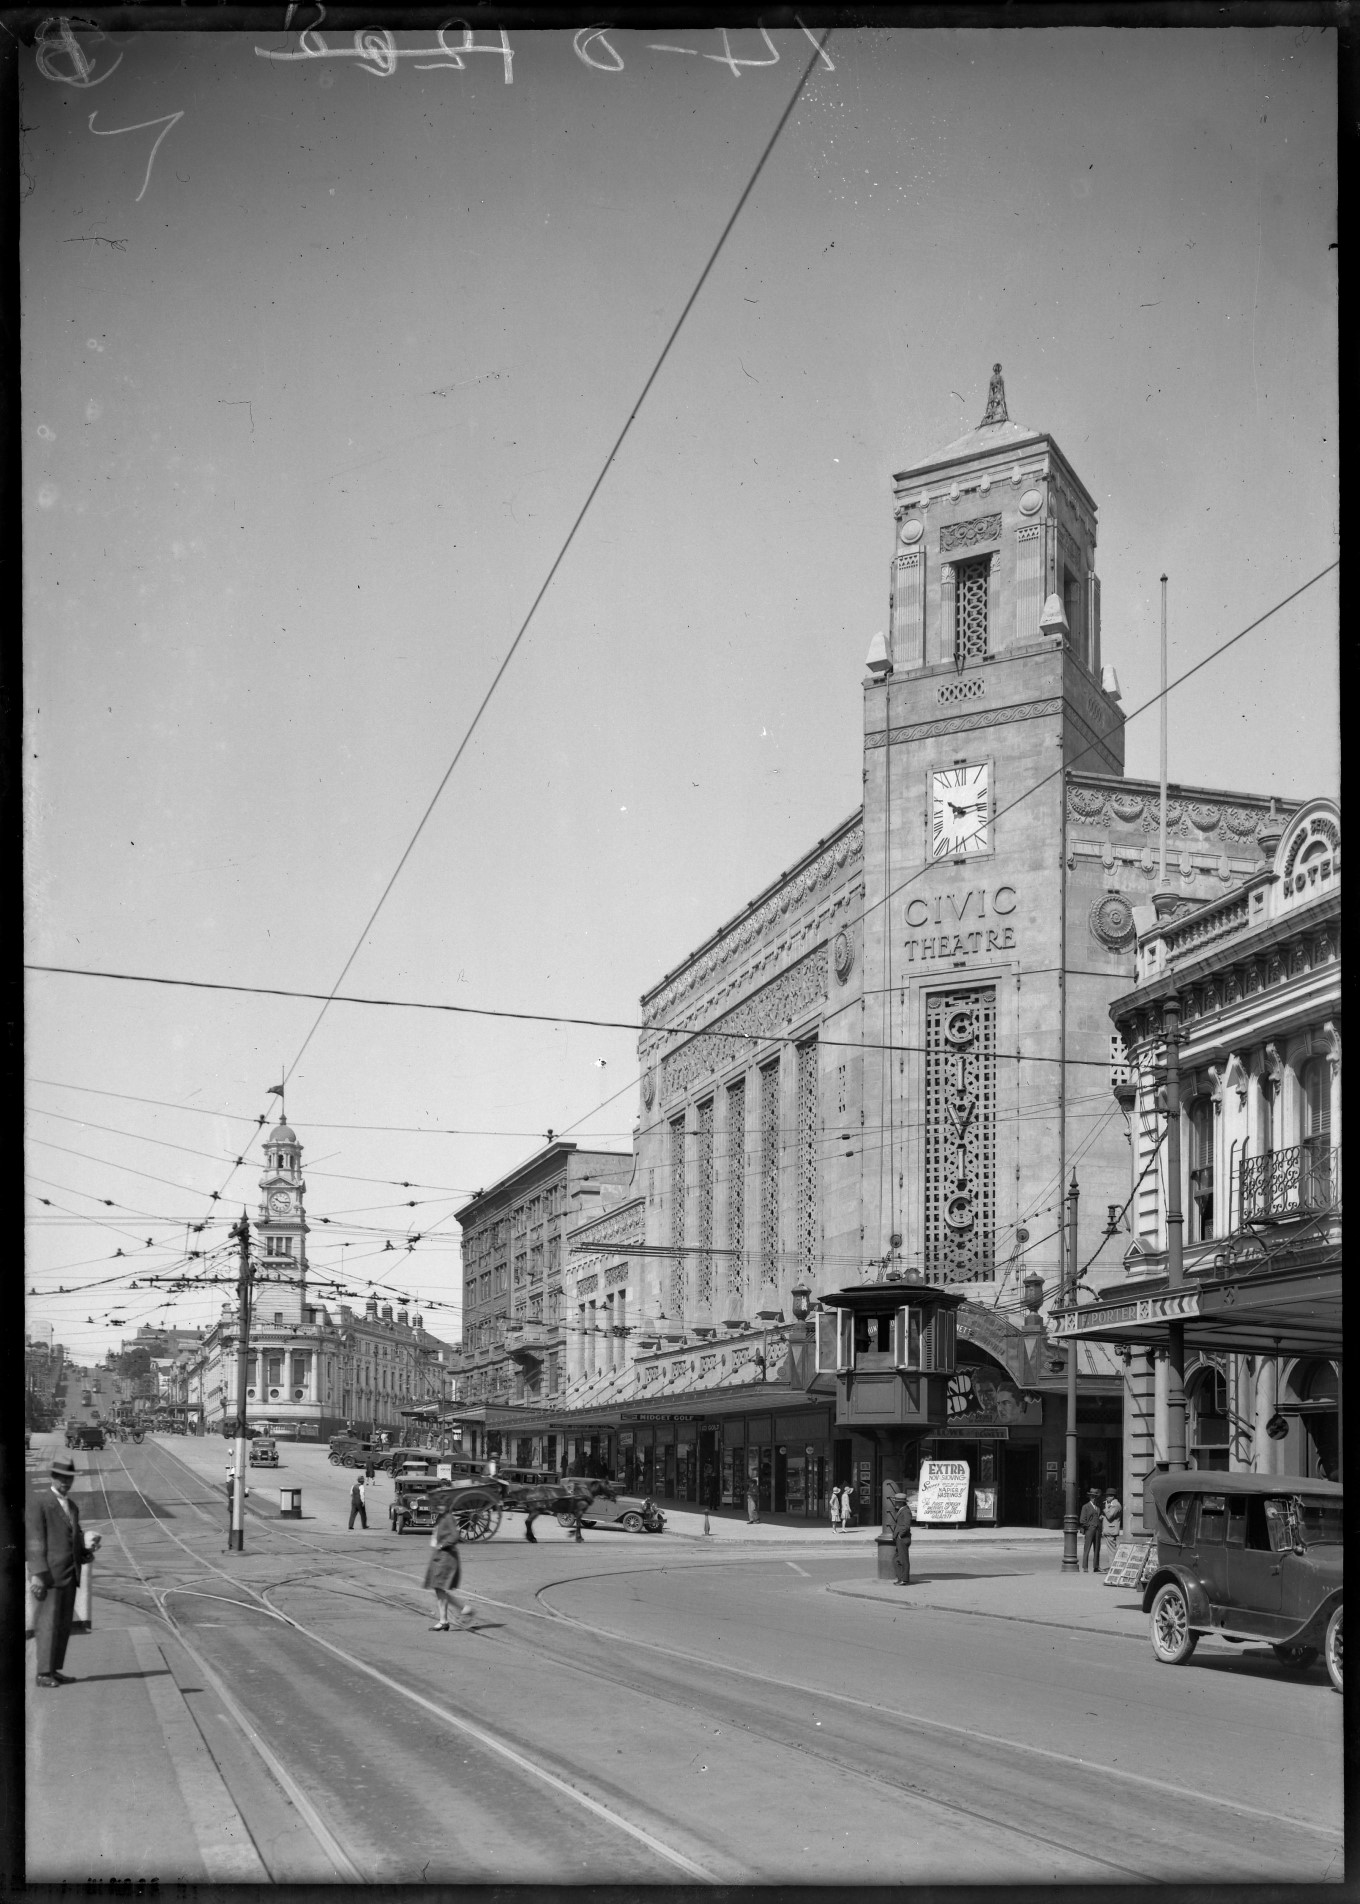 A view of the Civic Theatre in 1931, with the Union Service Hotel on the right and the Town Hall further up the road. A tram control tower can be seen on the corner of Wellesley Street, and a sign outside the Civic is advertising “the first motion pictures of the dominion’s greatest calamity” in reference to the Hawke’s Bay earthquake. Auckland Library Heritage Collections 4-7101 (J D Richardson).